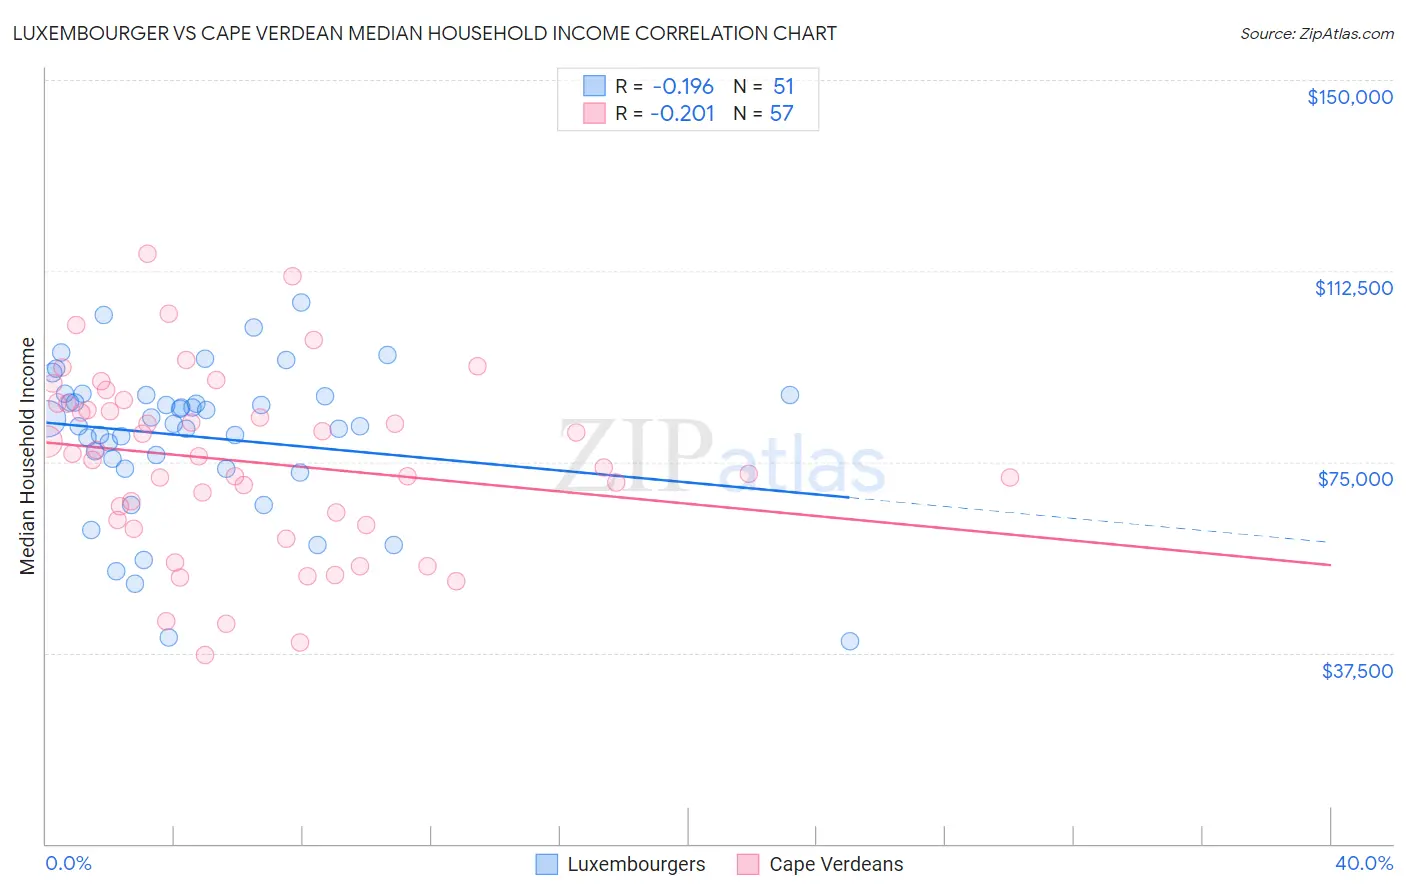 Luxembourger vs Cape Verdean Median Household Income